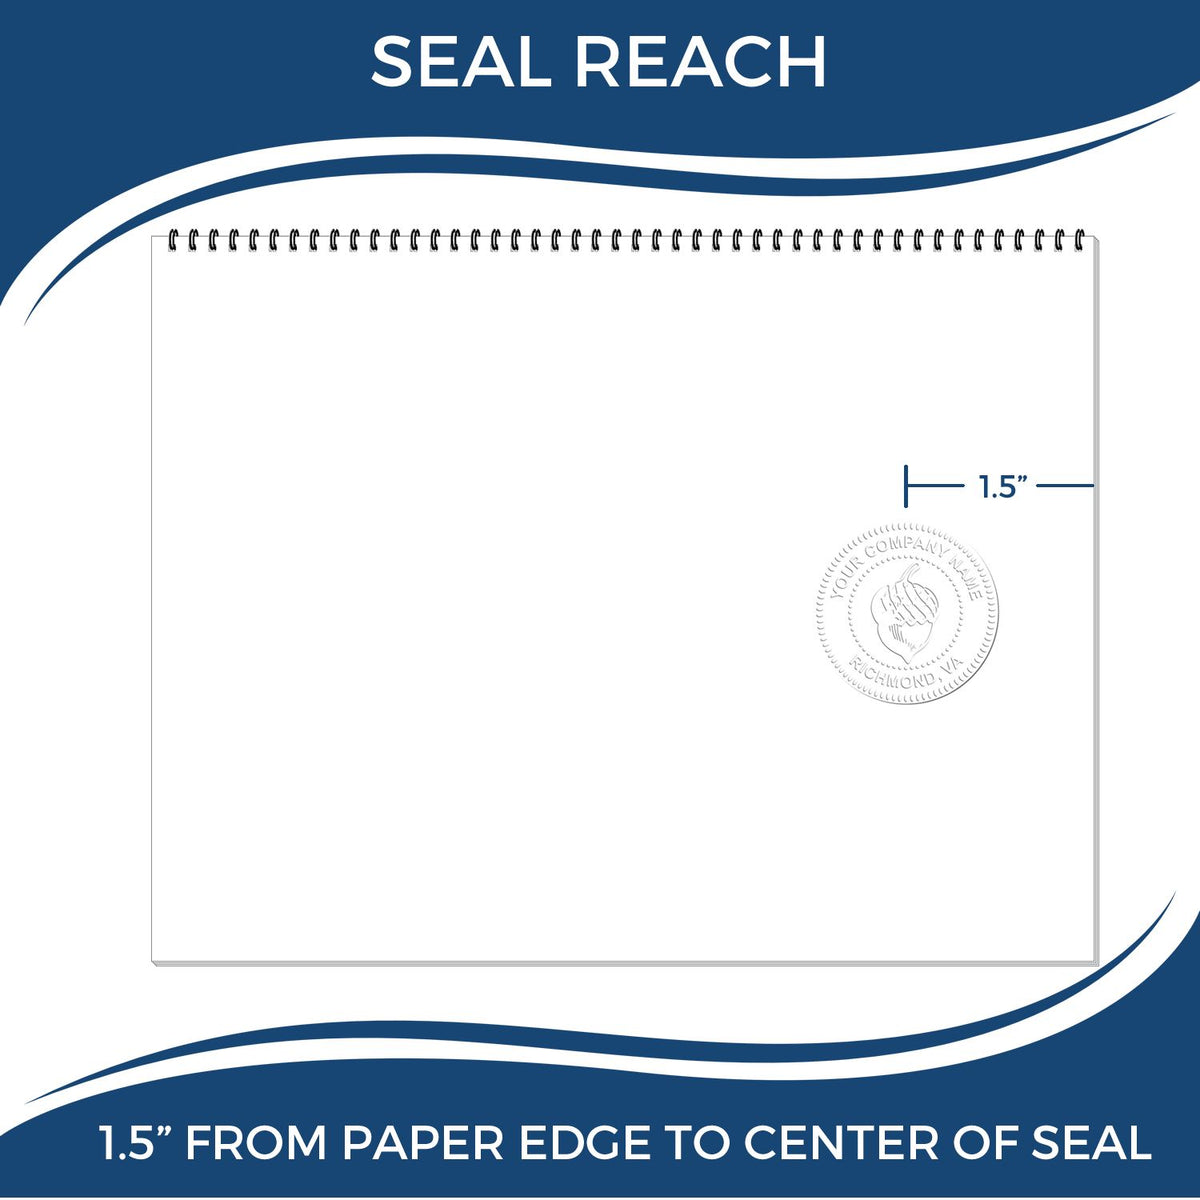 An infographic showing the seal reach which is represented by a ruler and a miniature seal image of the Handheld Hawaii Architect Seal Embosser